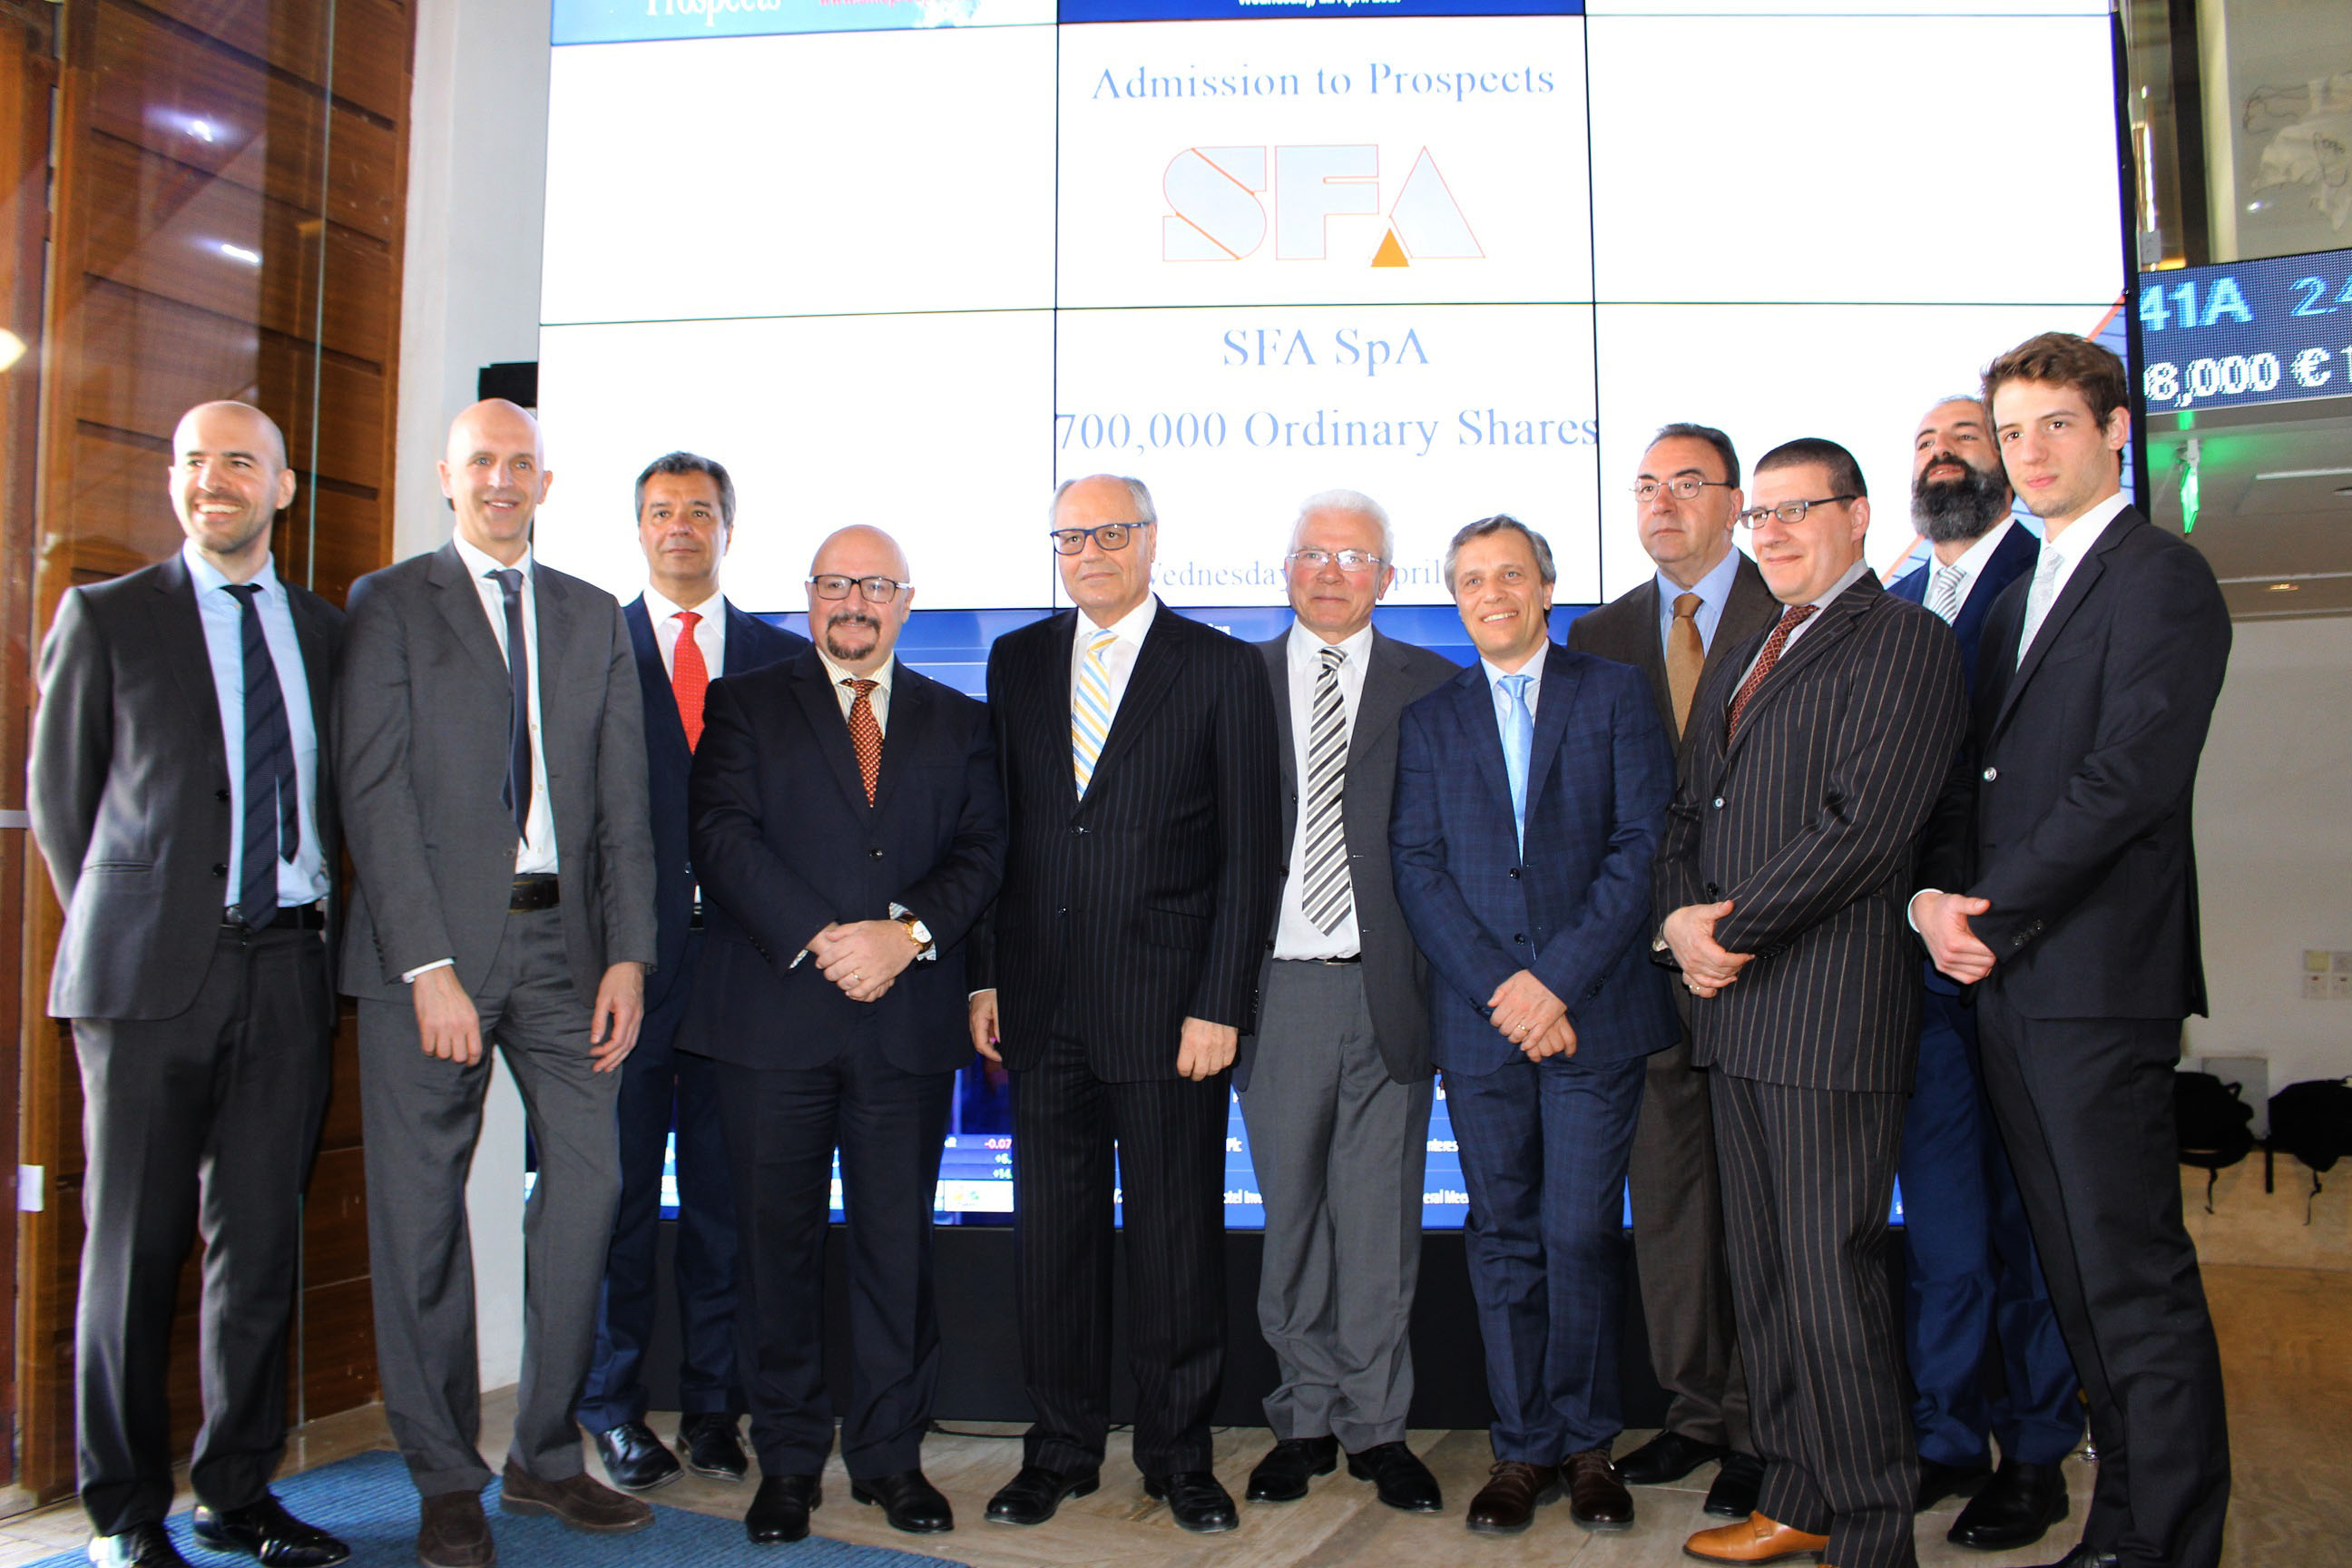 Minister for Finance inaugurates the first two listings on the MSE Prospects platform